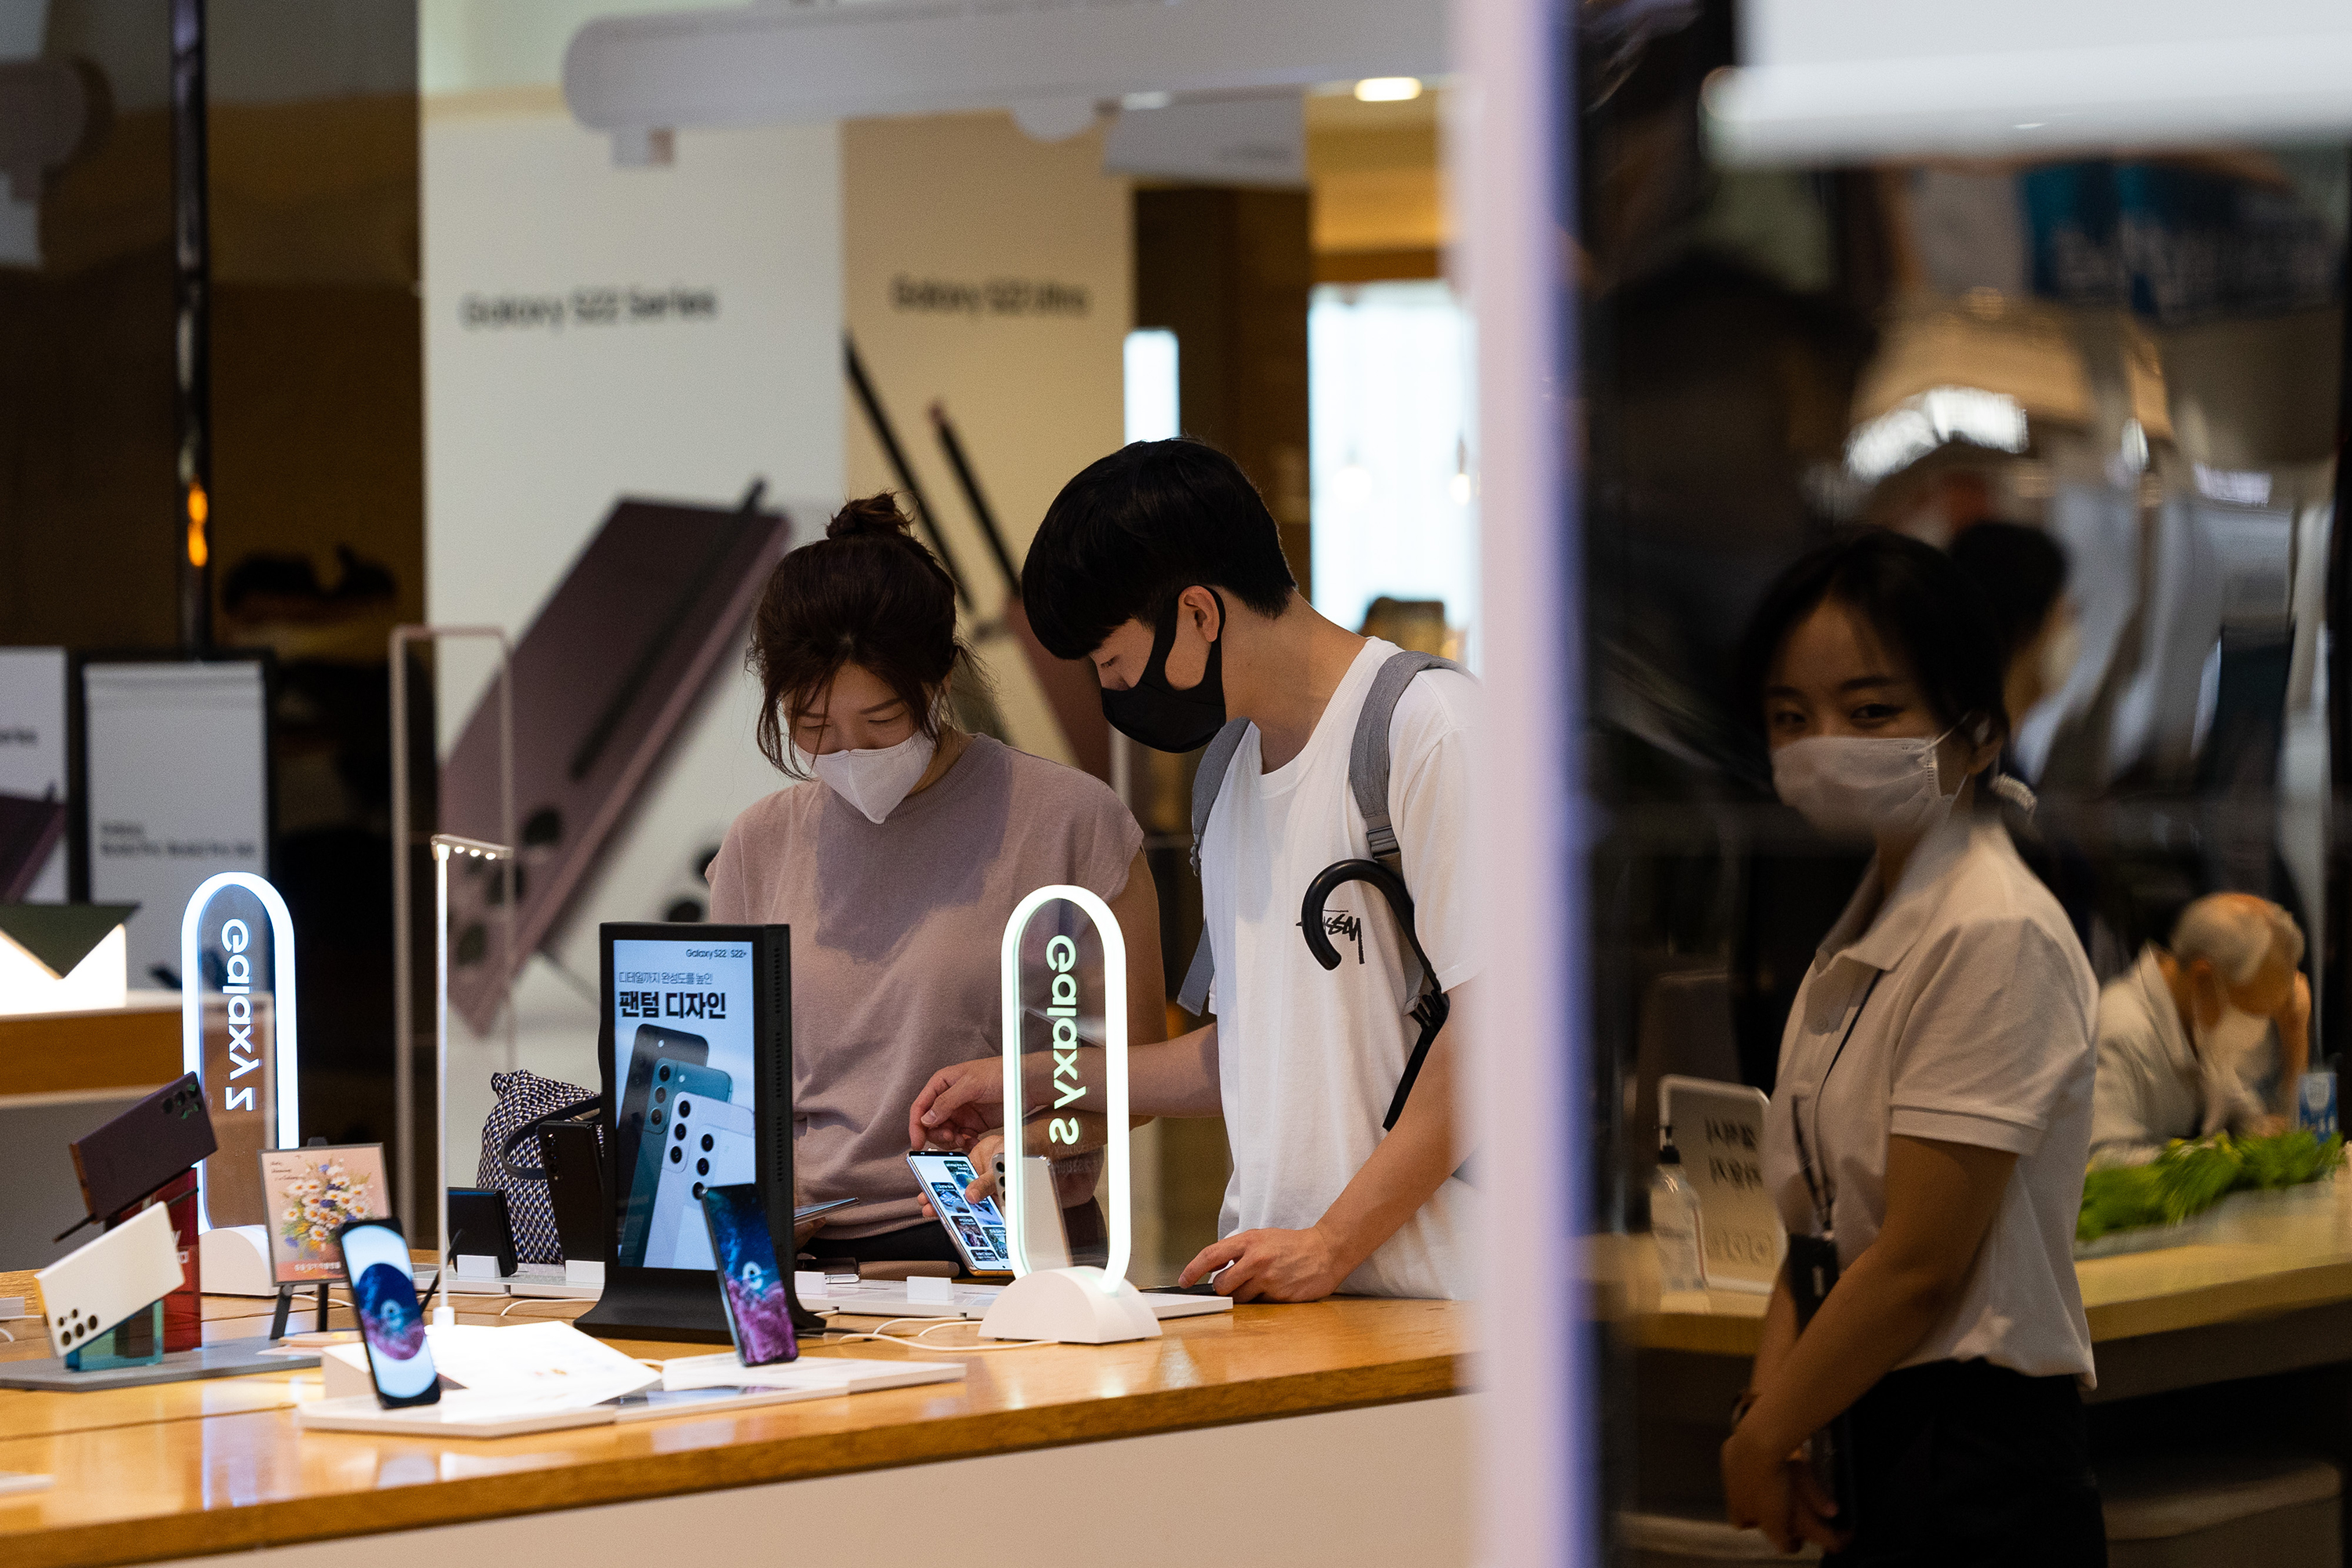 Customers try out Samsung Galaxy smartphones at the store in Seoul, South Korea, on July 5.